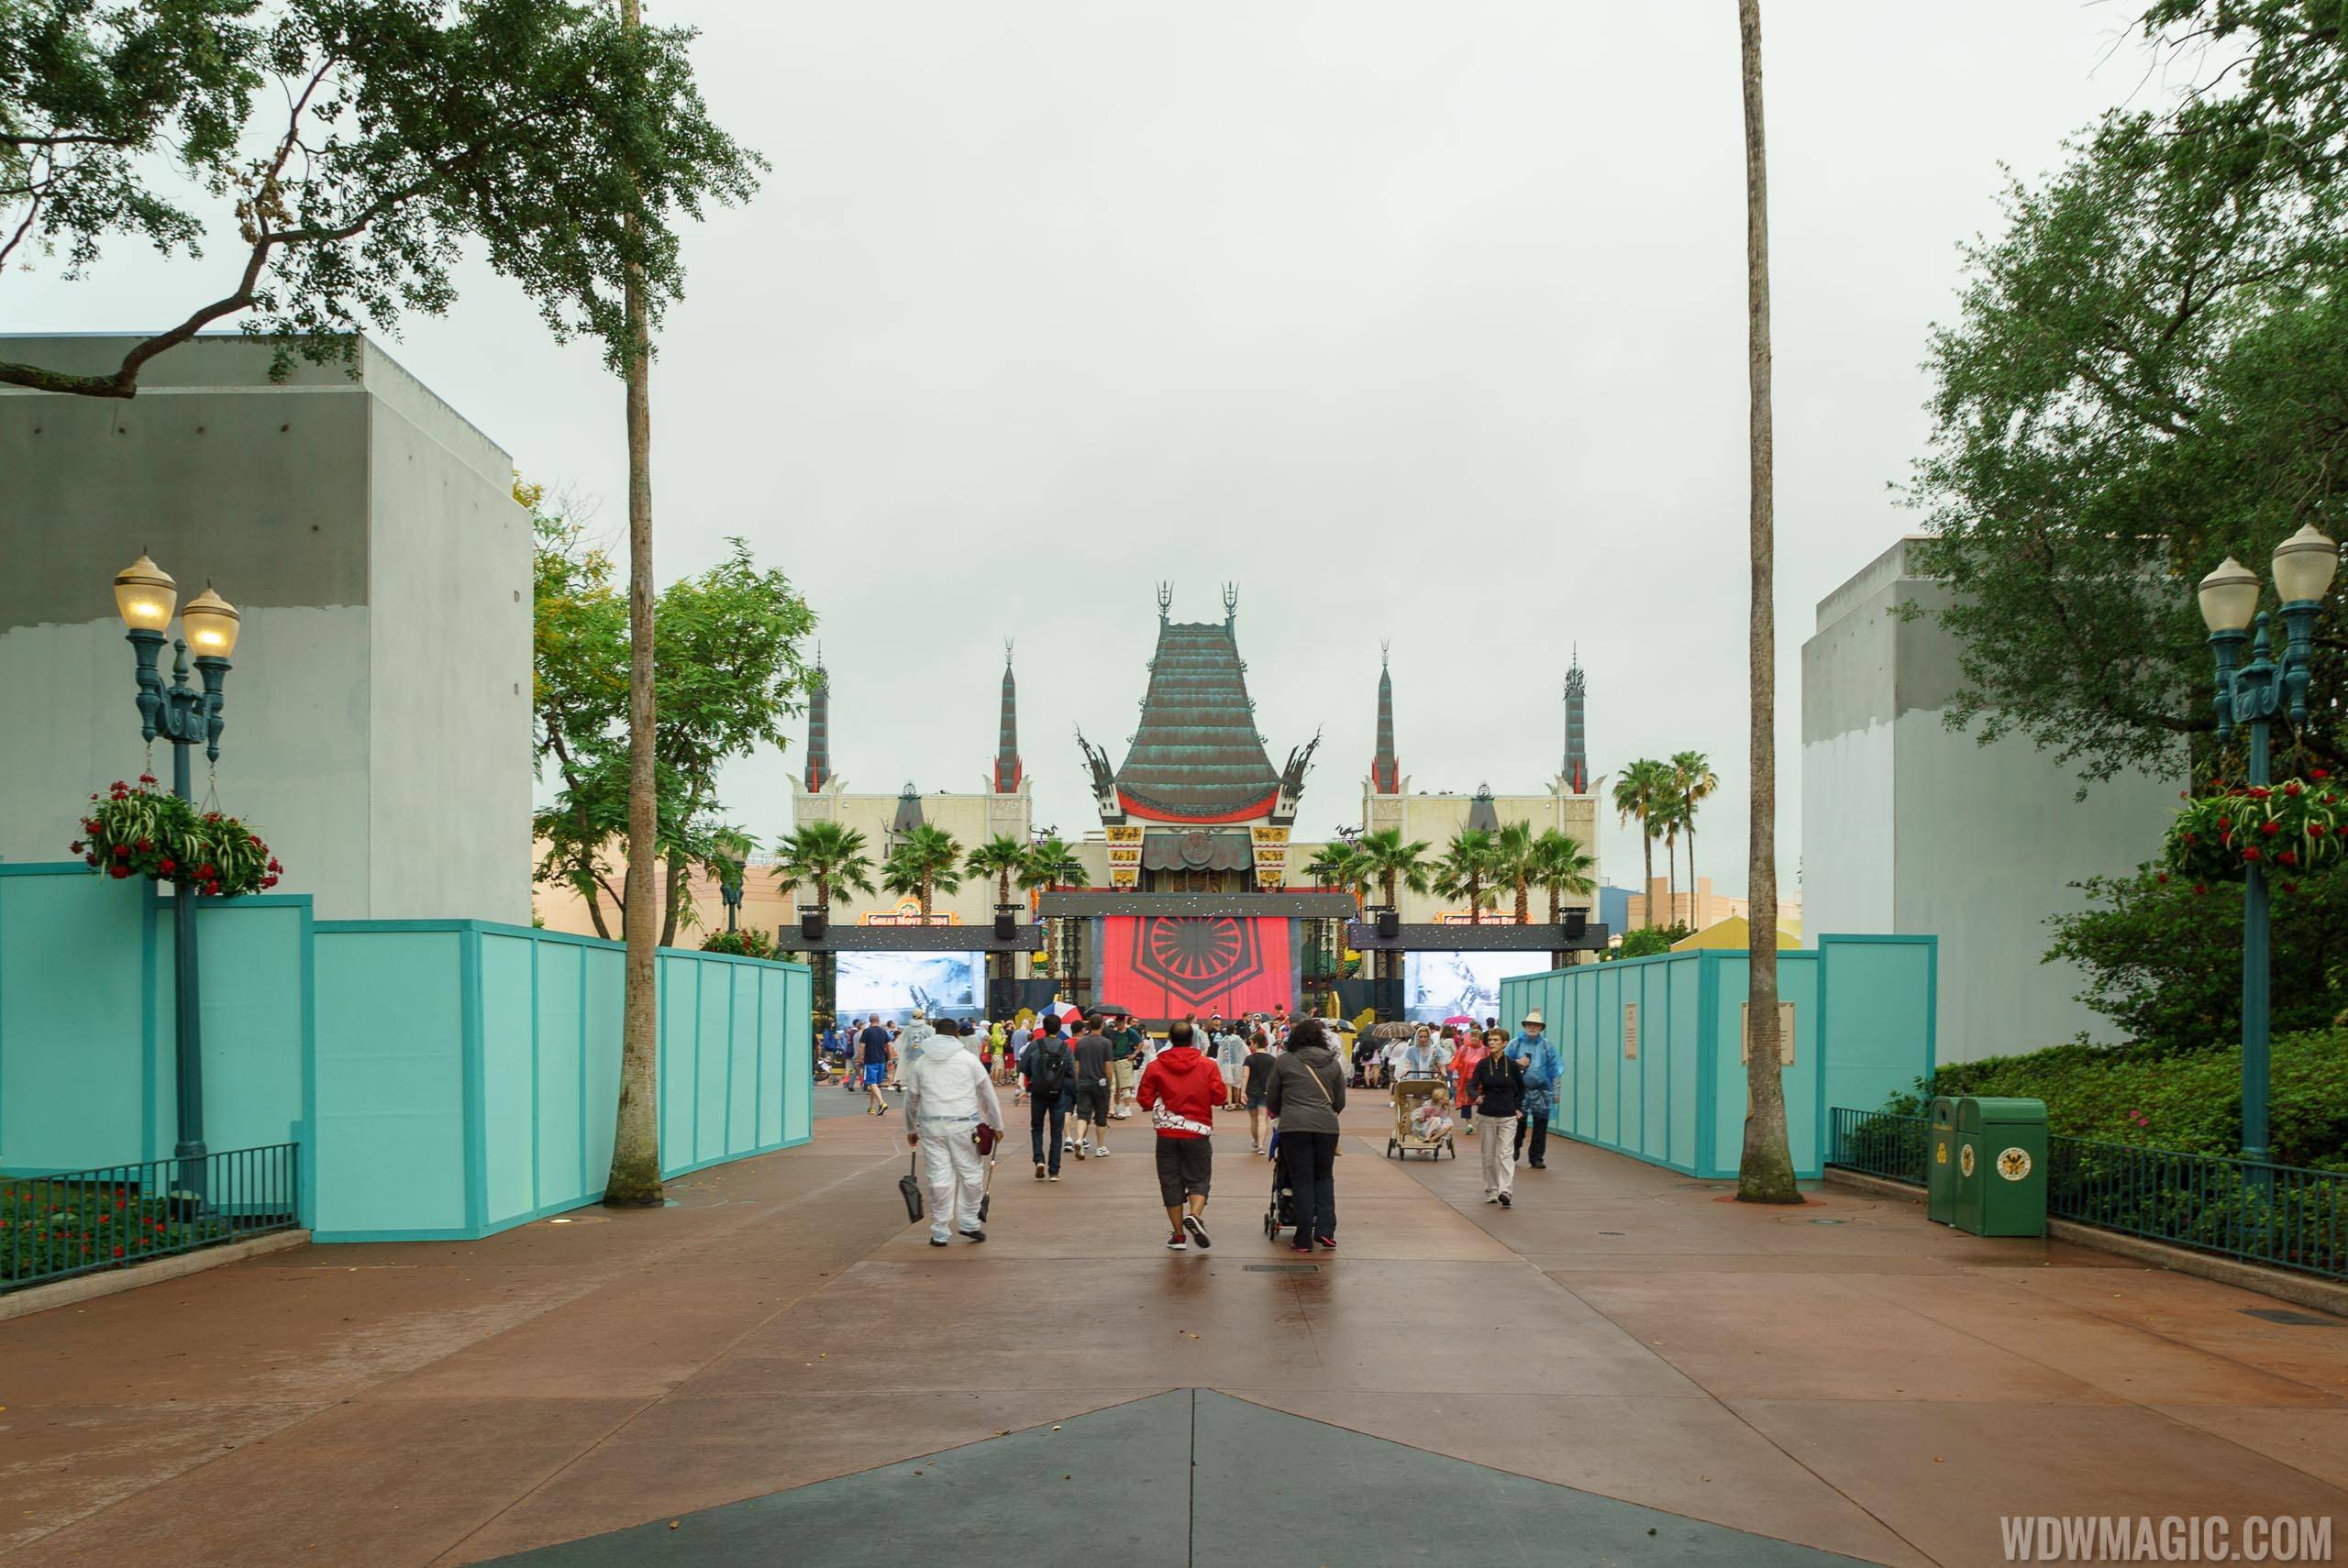 PHOTOS - Construction well underway on new nighttime spectacular projection system at Disney's Hollywood Studios